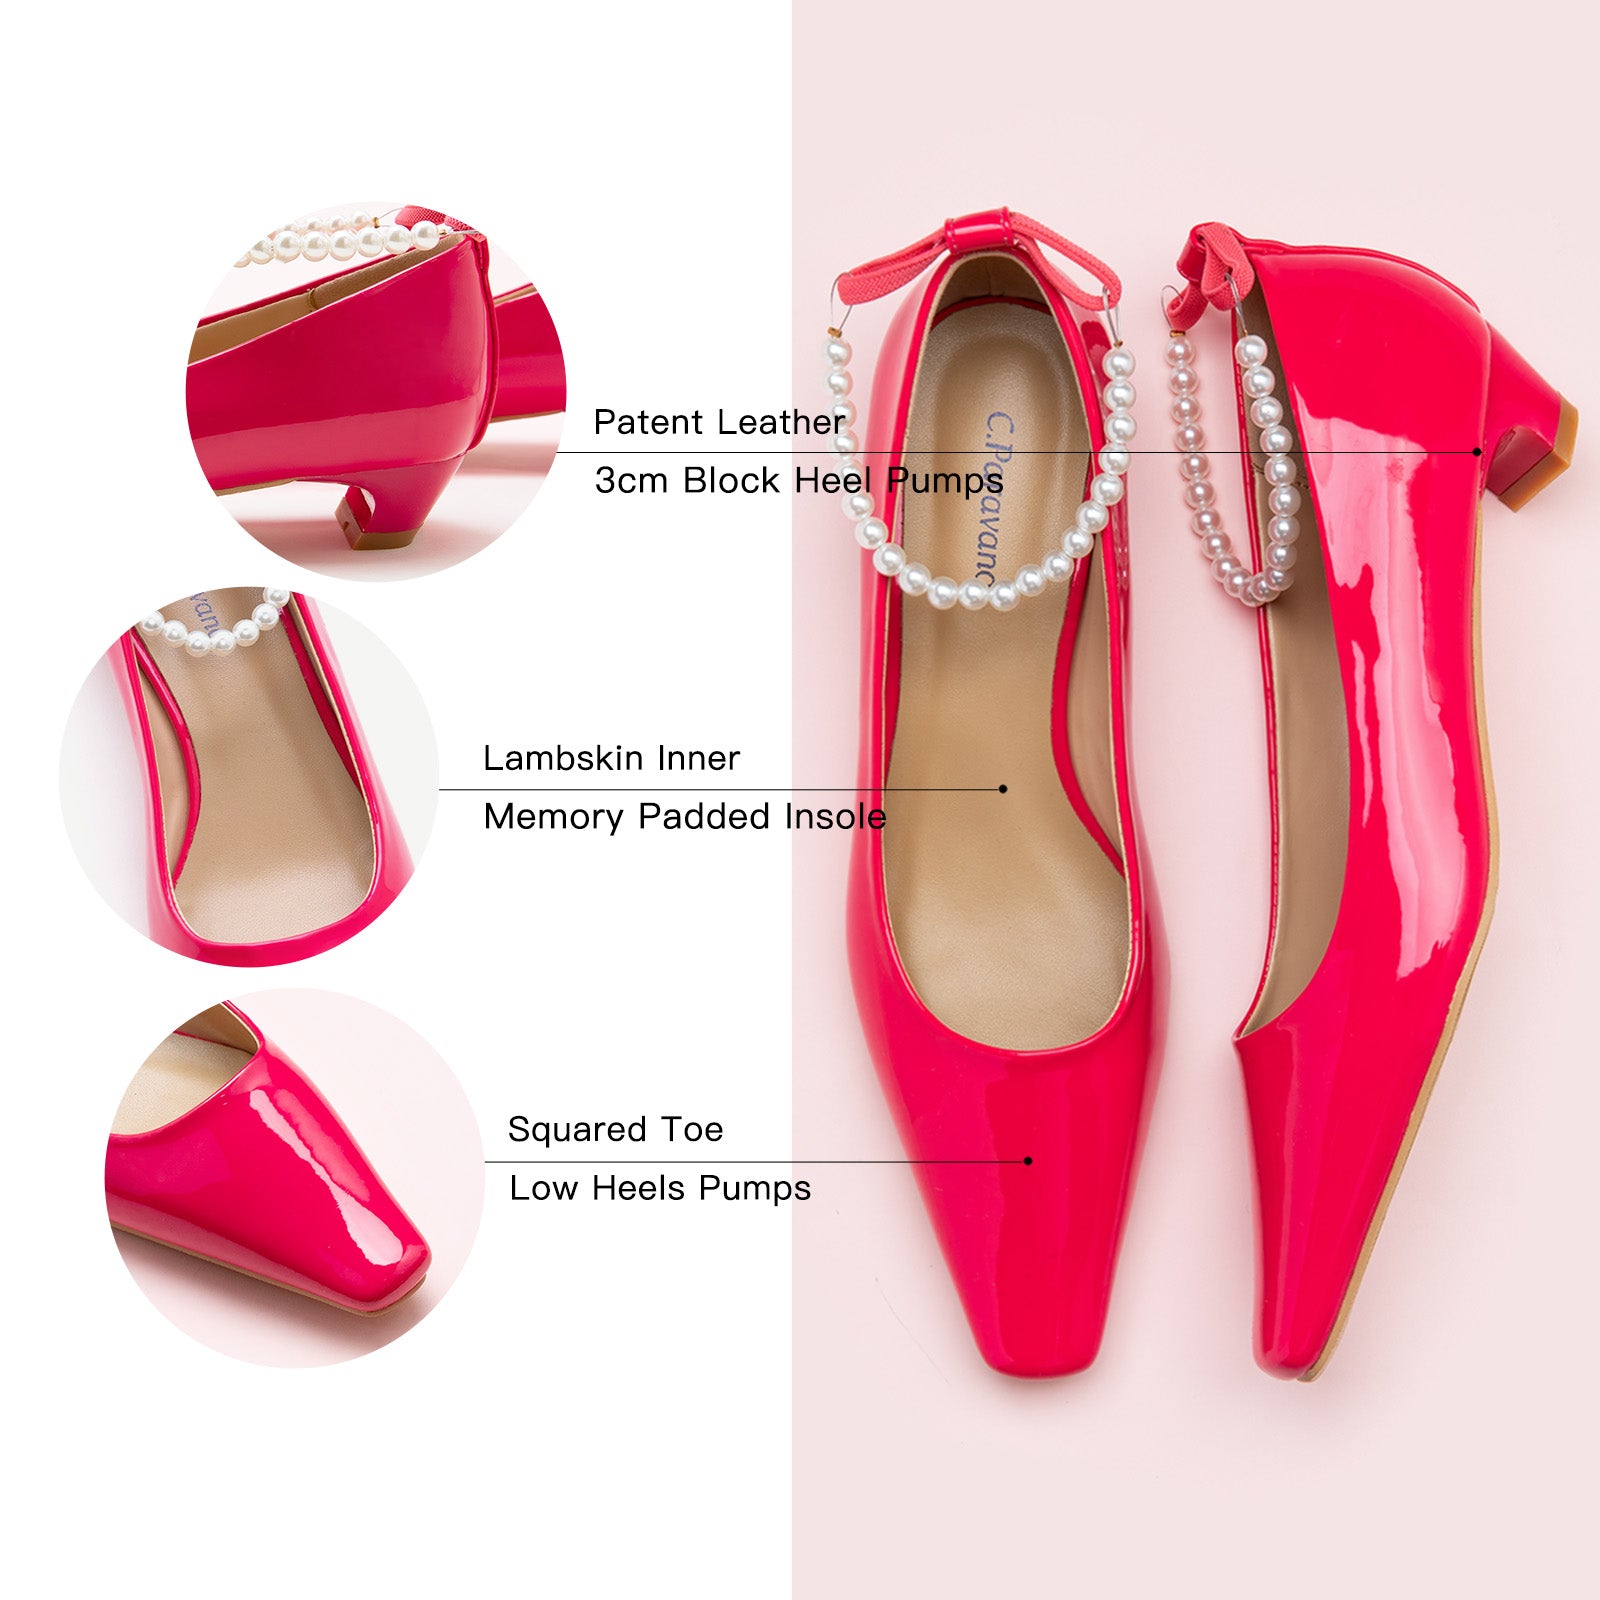 : Hot Pink Low Heel with delicate pearl straps, a confident and eye-catching addition to your footwear collection